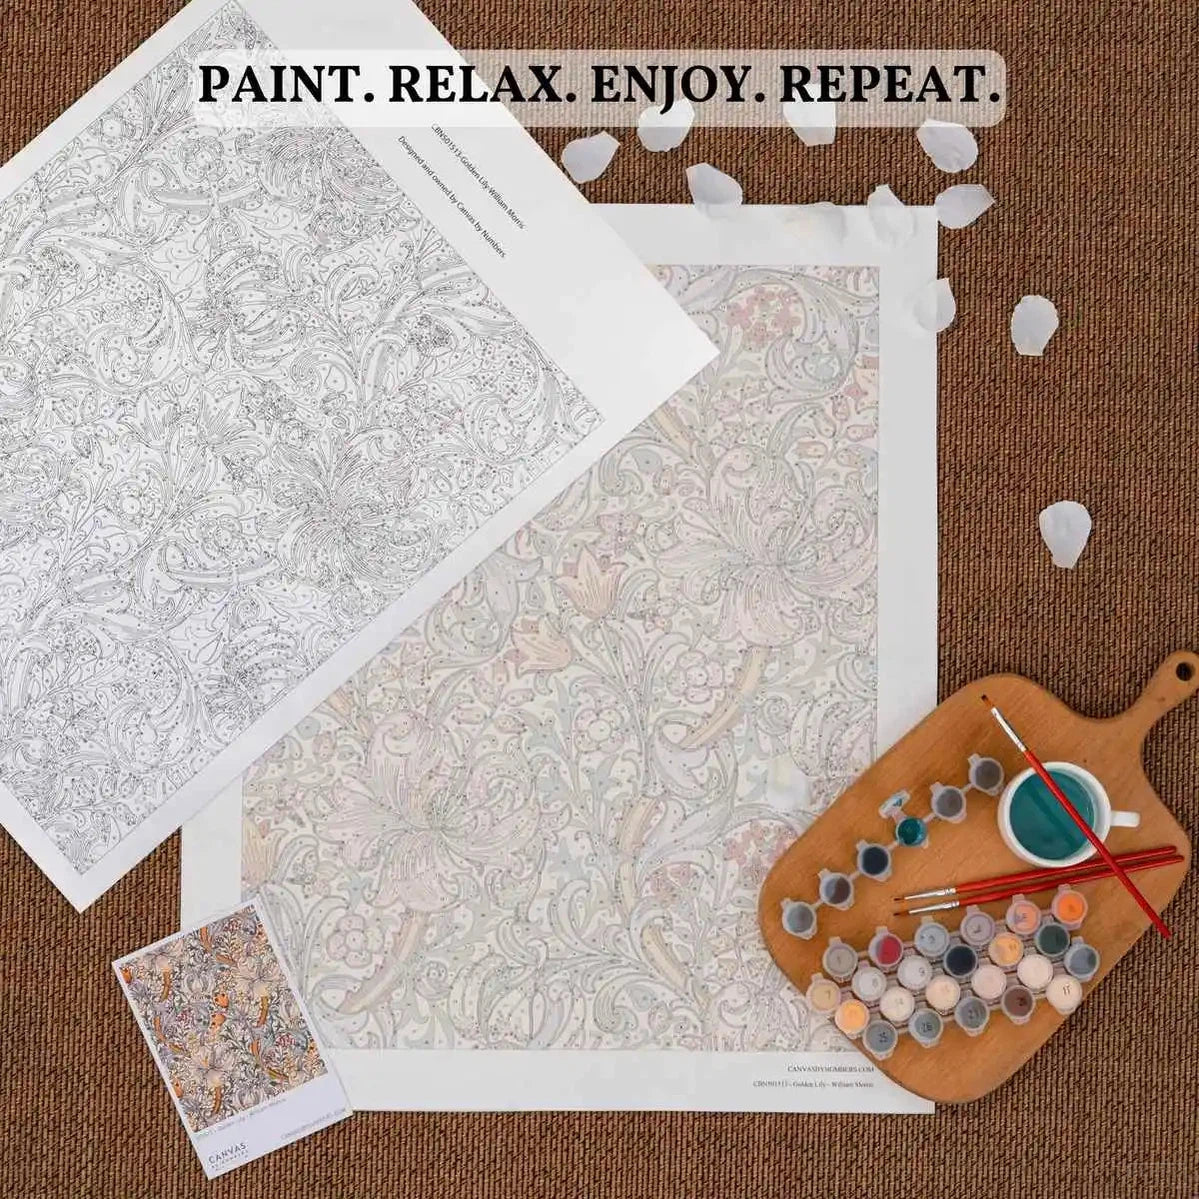 Illumination - Mandala Paint by Number-Shine bright with our "Illumination" Mandala Paint by Number. Express your light through art with Canvas by Numbers' mandala painting kits. Shop now!-Canvas by Numbers